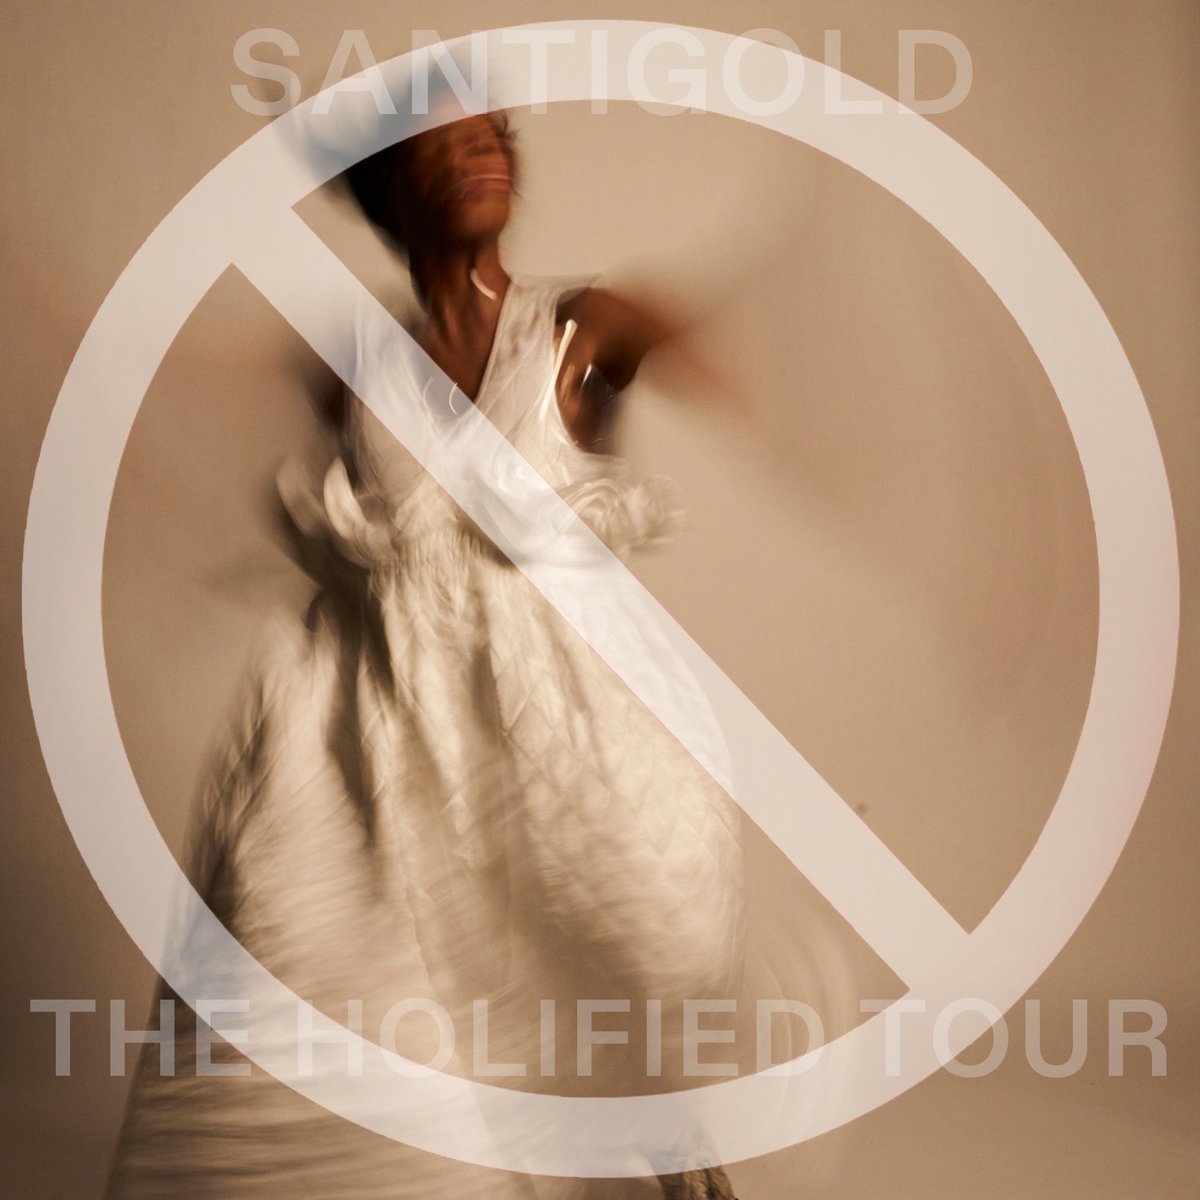 I am so sorry to announce the cancellation of my Holified Tour. Please read the letter attached or click the link below to read the full letter with details of this announcement. santigold.com/tour/